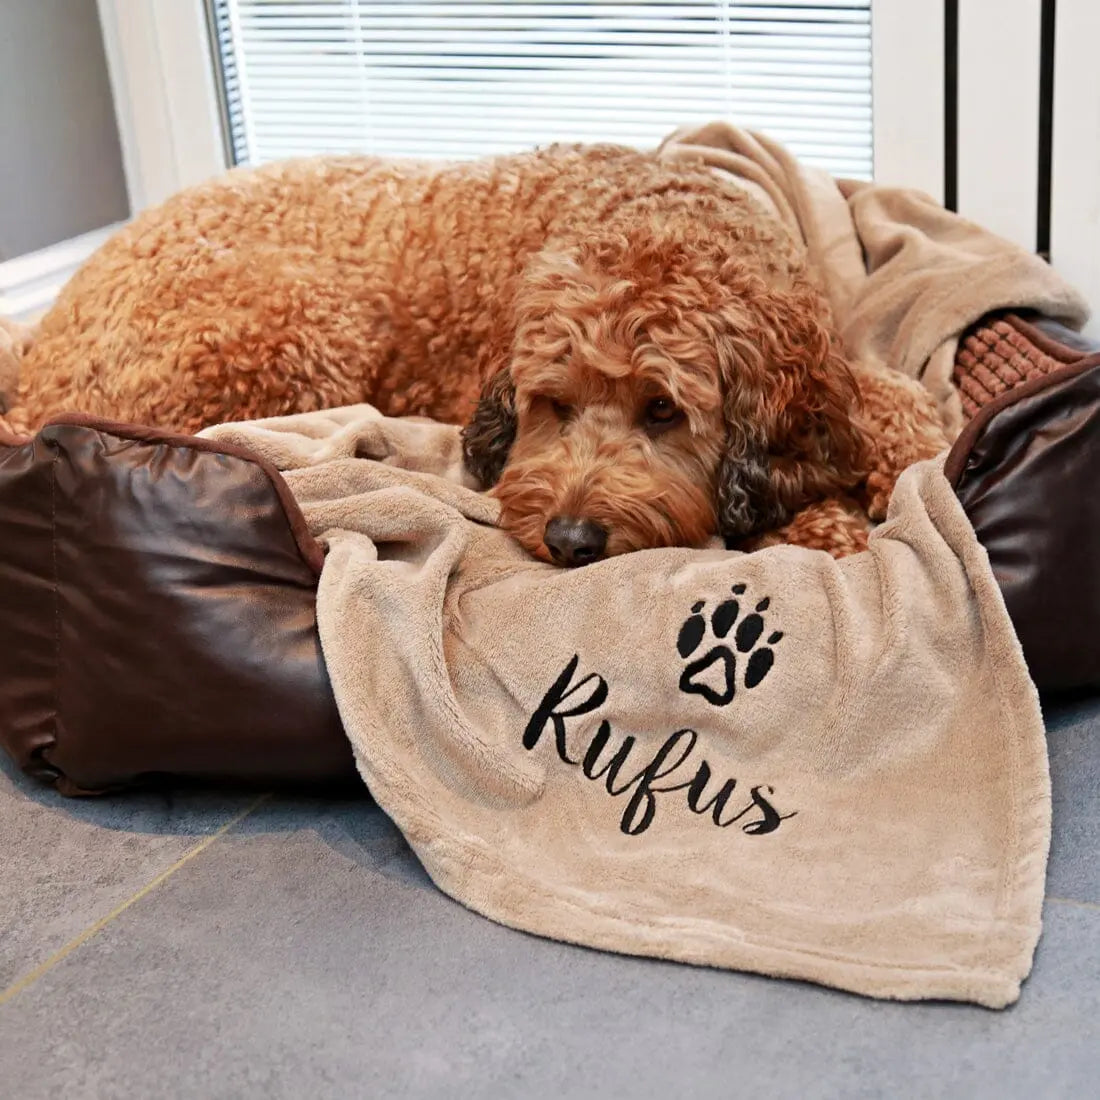 Personalised Dog Blanket with Rufus and a Paw Logo Embroidered on, Rufus snuggled up with the blanket on this bed